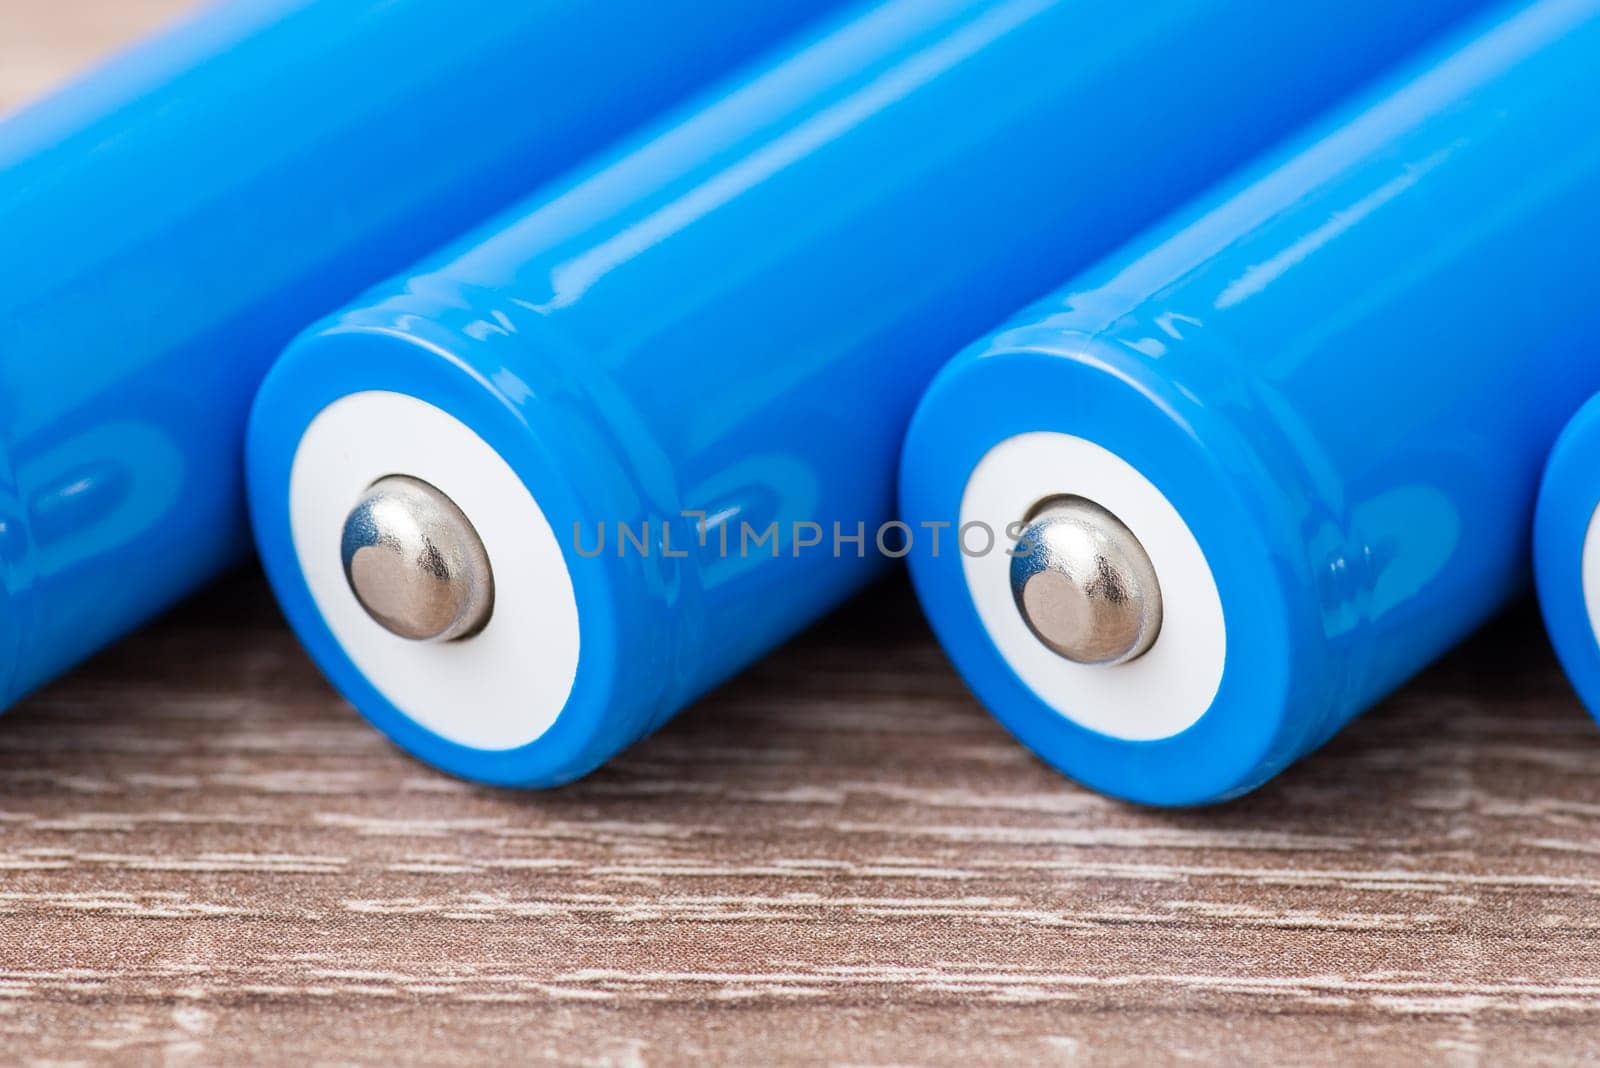 New high capacity batteries on the table